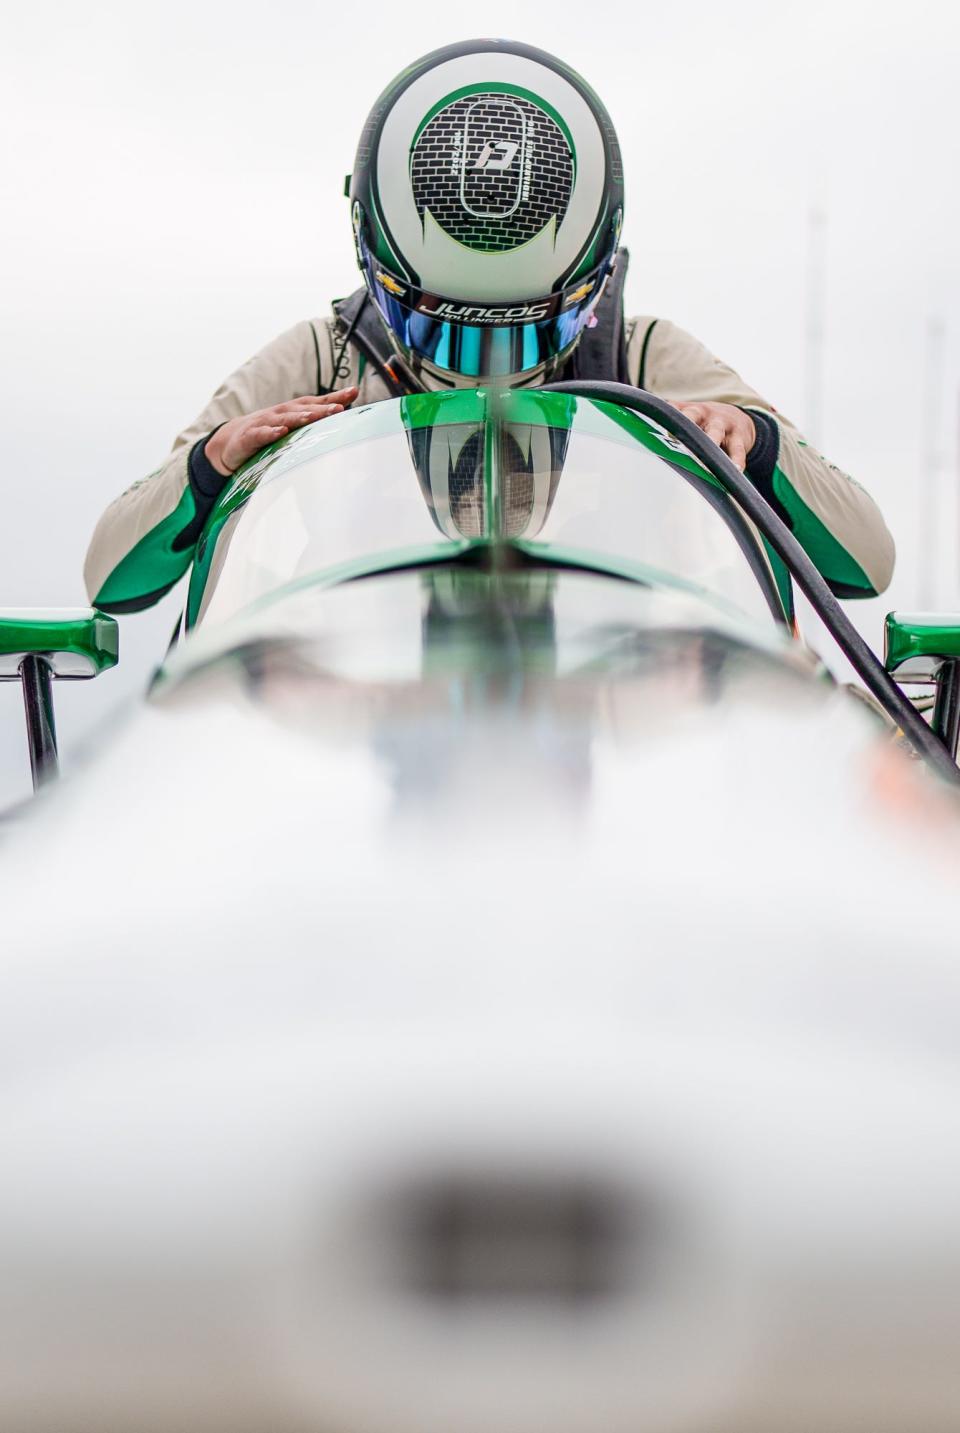 Juncos Hollinger Racing driver Callum Ilott (77) sits down into his car Saturday, May 21, 2022, during a morning practice session before qualifying for the 106th running of the Indianapolis 500 at Indianapolis Motor Speedway.